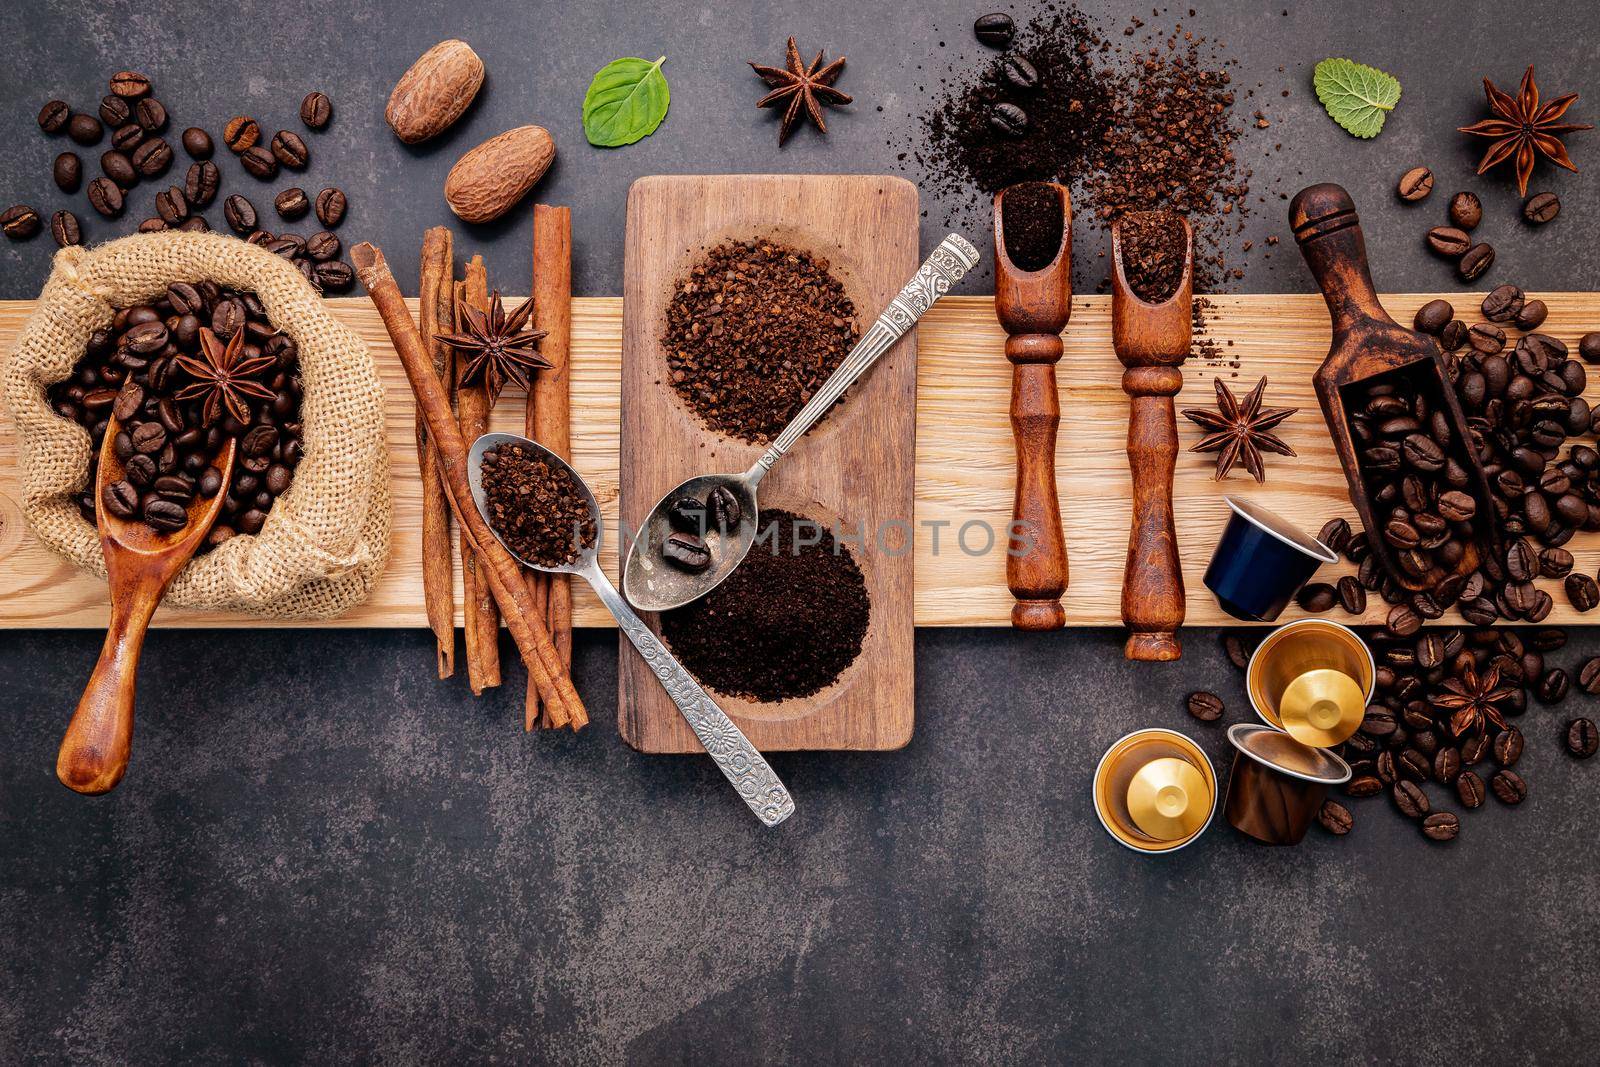 Roasted coffee beans with coffee powder and flavourful ingredients for make tasty coffee setup on dark stone background.